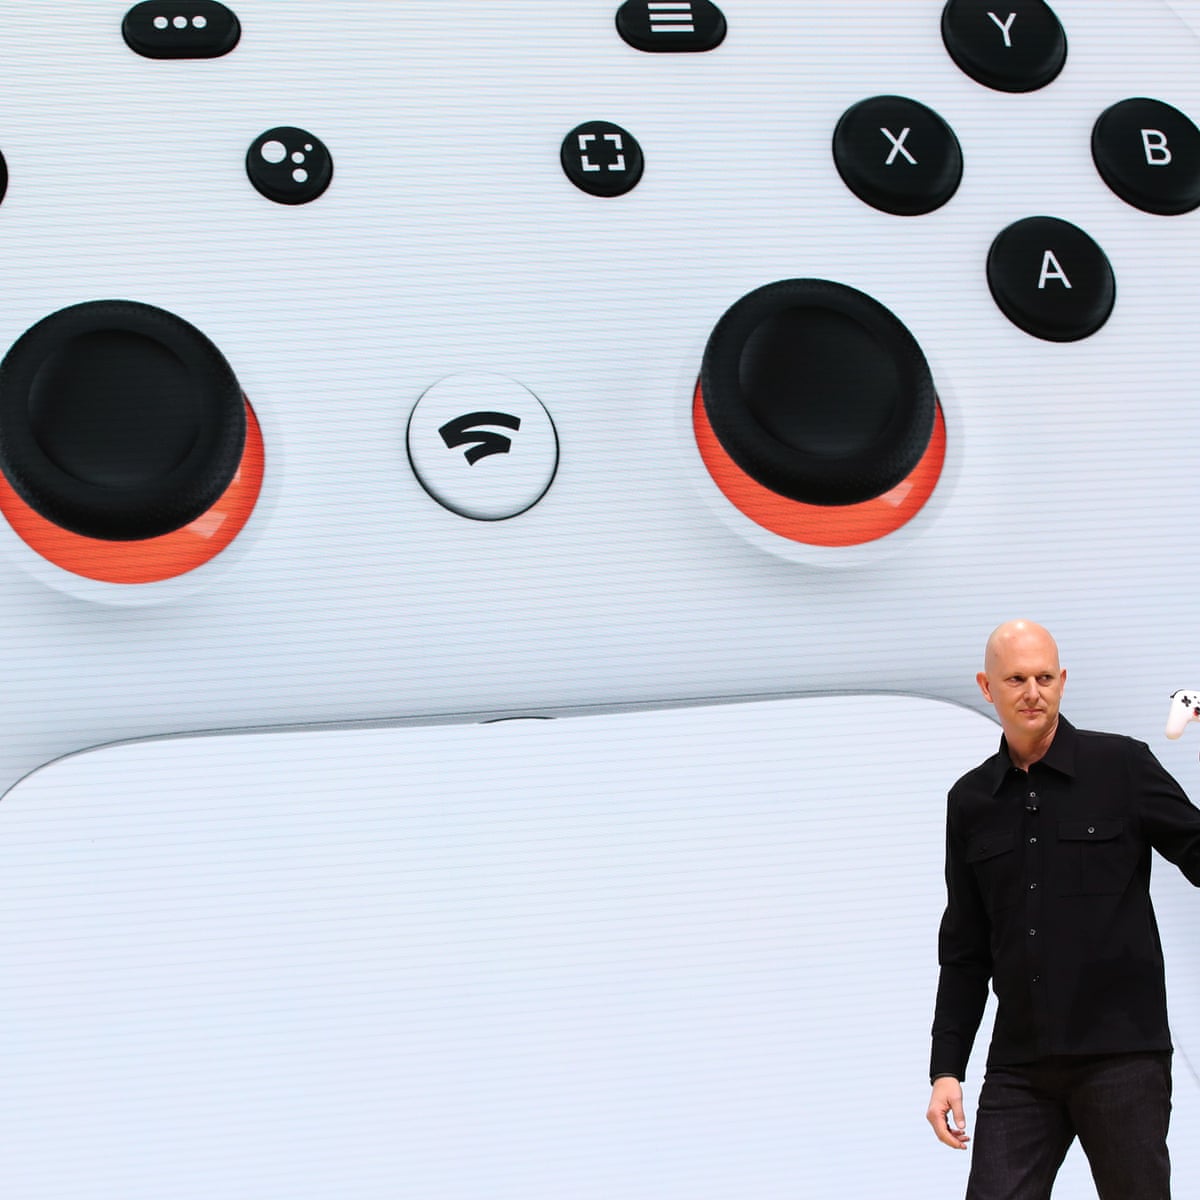 You can now play games on your PC via an Xbox One controller - CNET